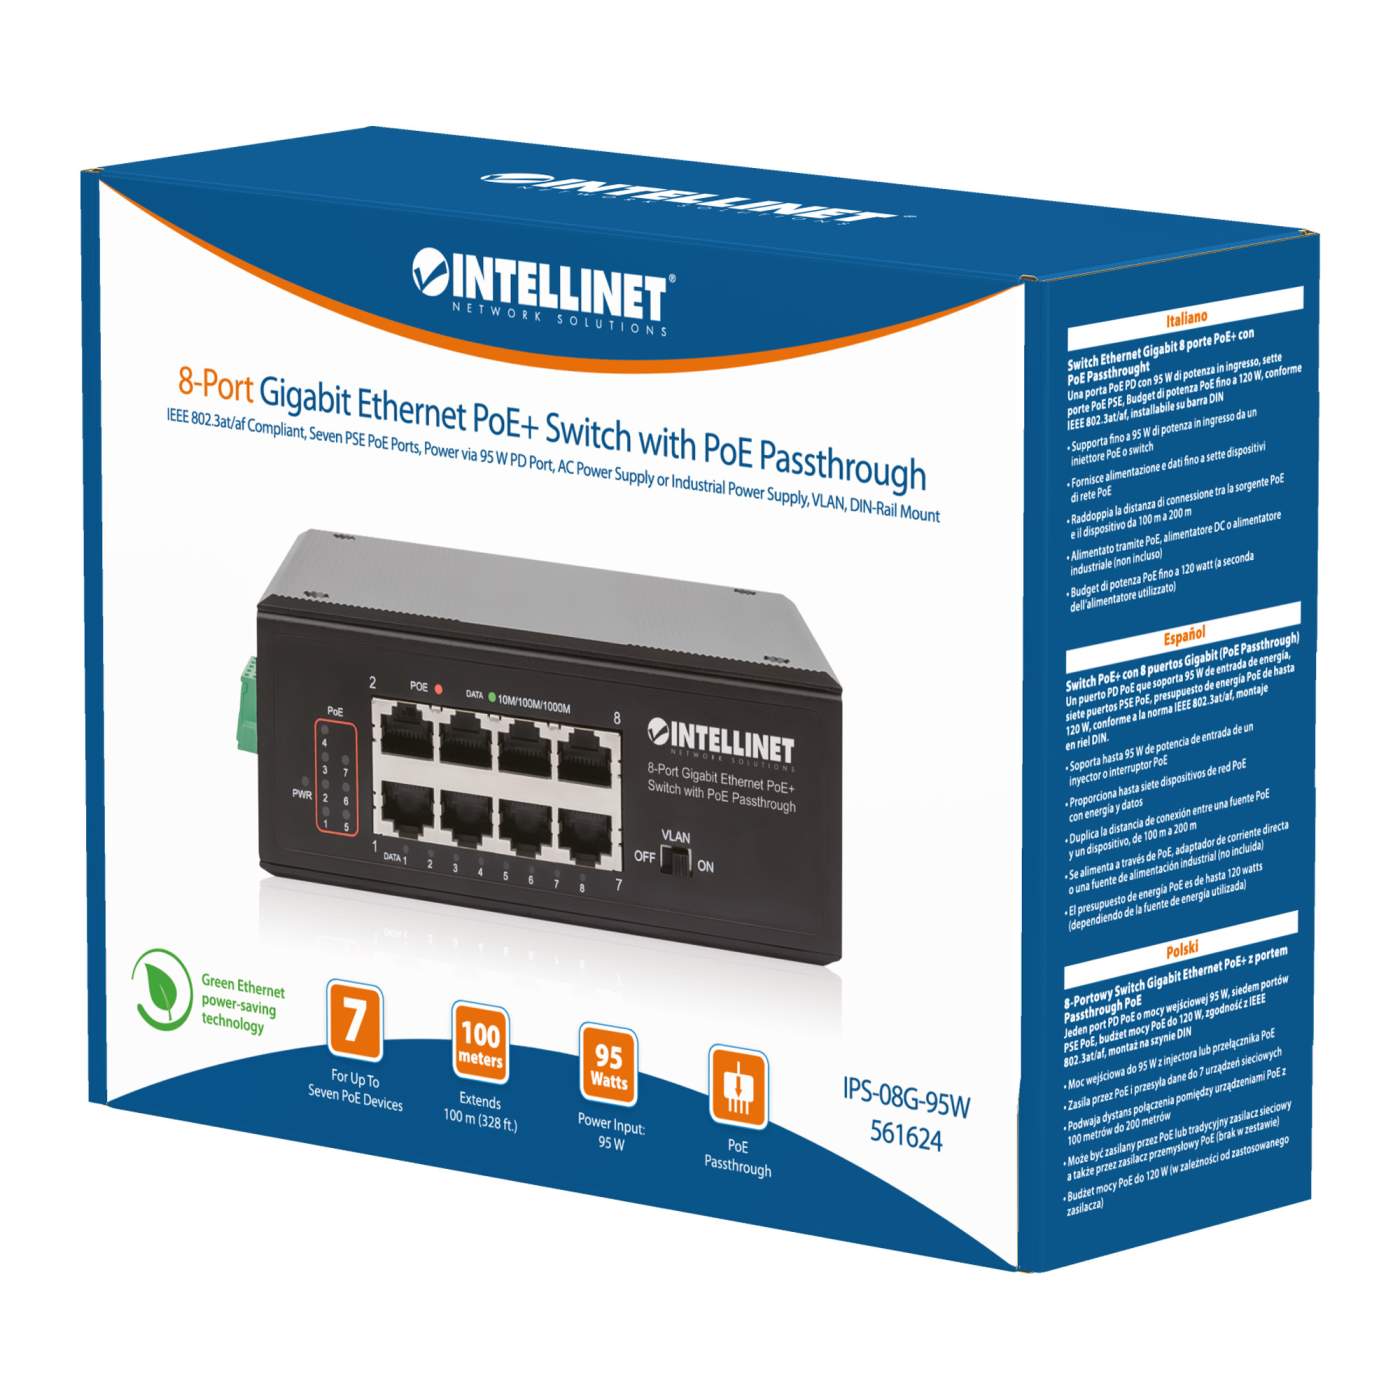 PoE-Powered 8-Port PoE+ Gigabit Industrie-Switch mit PoE-Passthrough Packaging Image 2